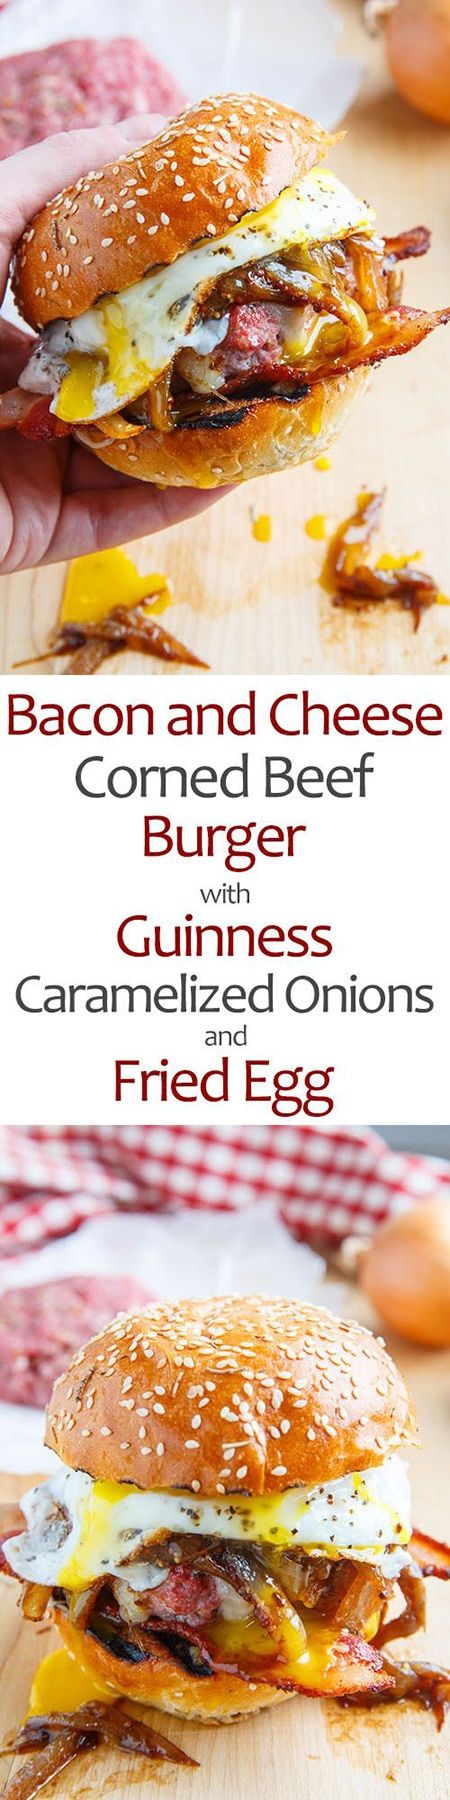 Bacon and Cheese Corned Beef Burger with Guinness Caramelized Onions